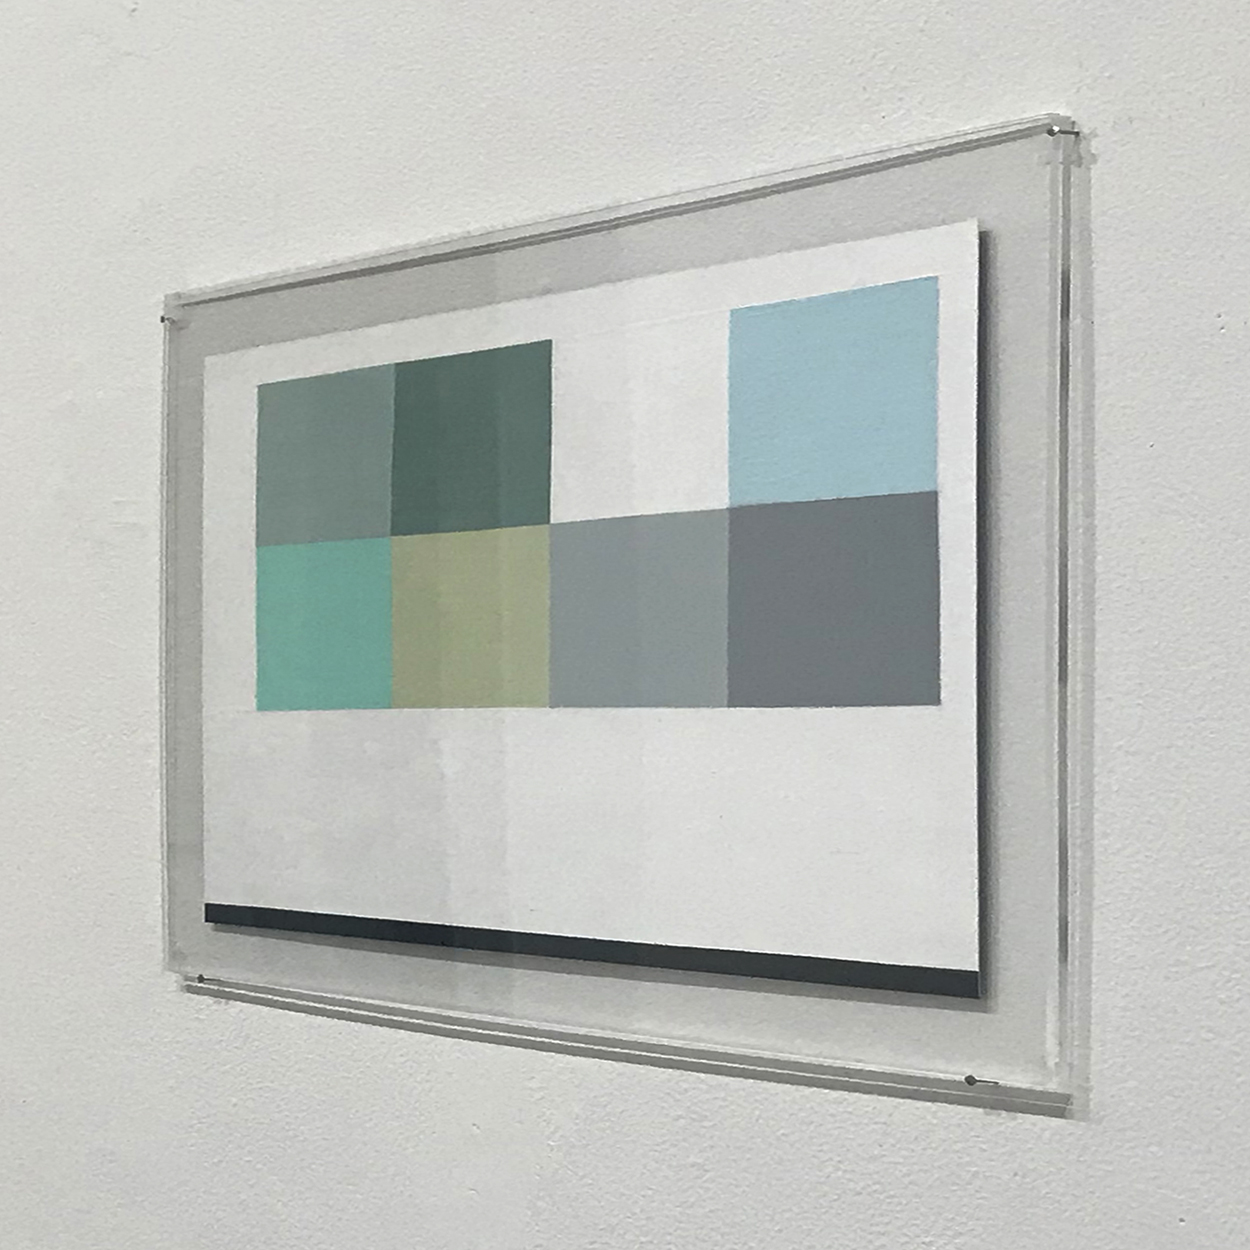 Untitled, Water-based paint on paper, acrylic plates, 196 x 285 mm, 2021